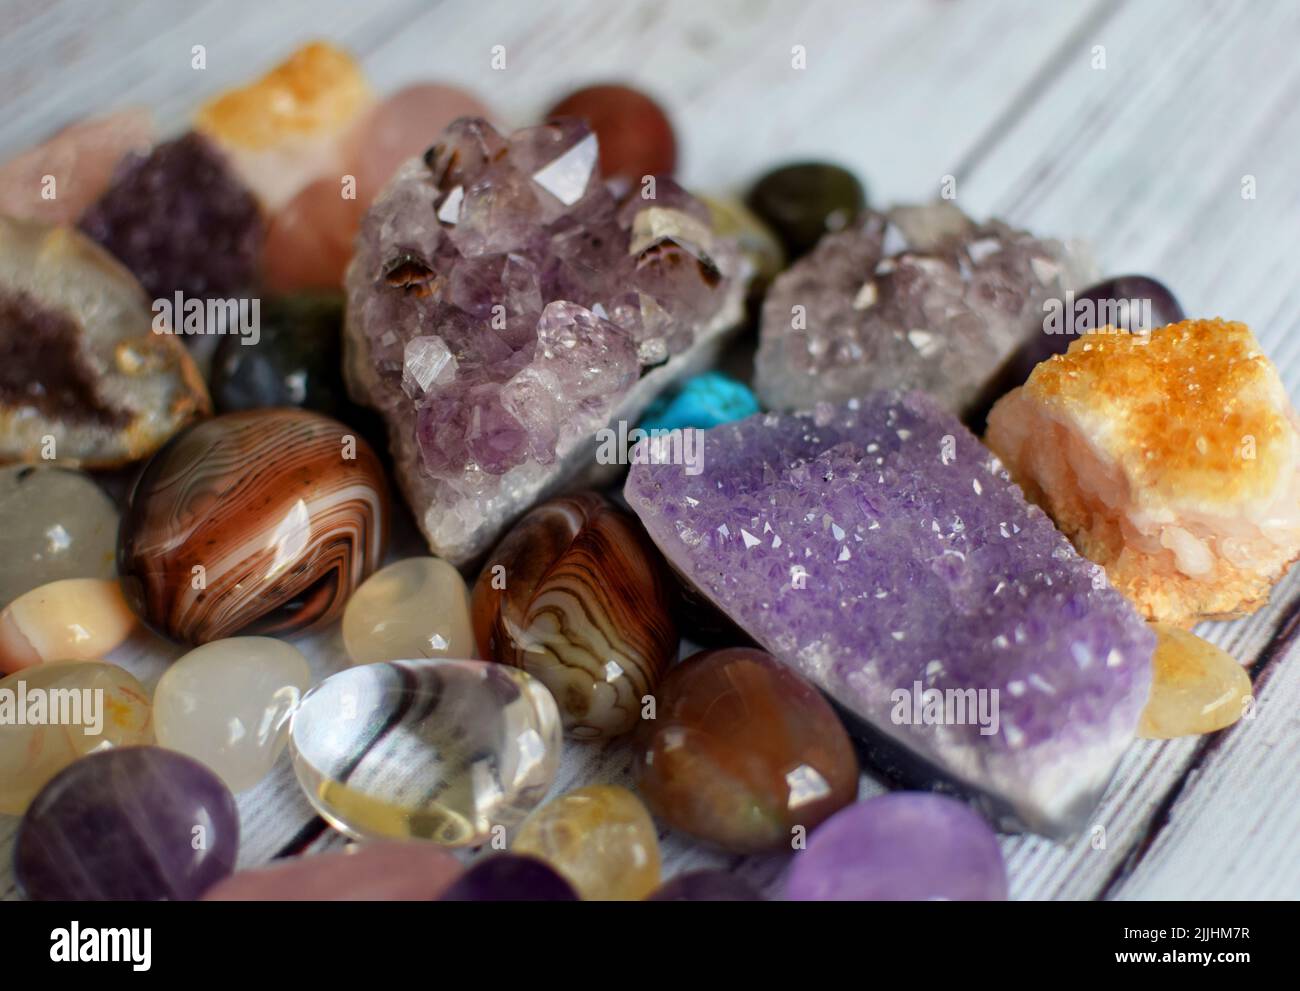 Beautiful amethyst crystals, round rose quartz stone and bostwana agate on a wooden background. Magic amulets. Stock Photo